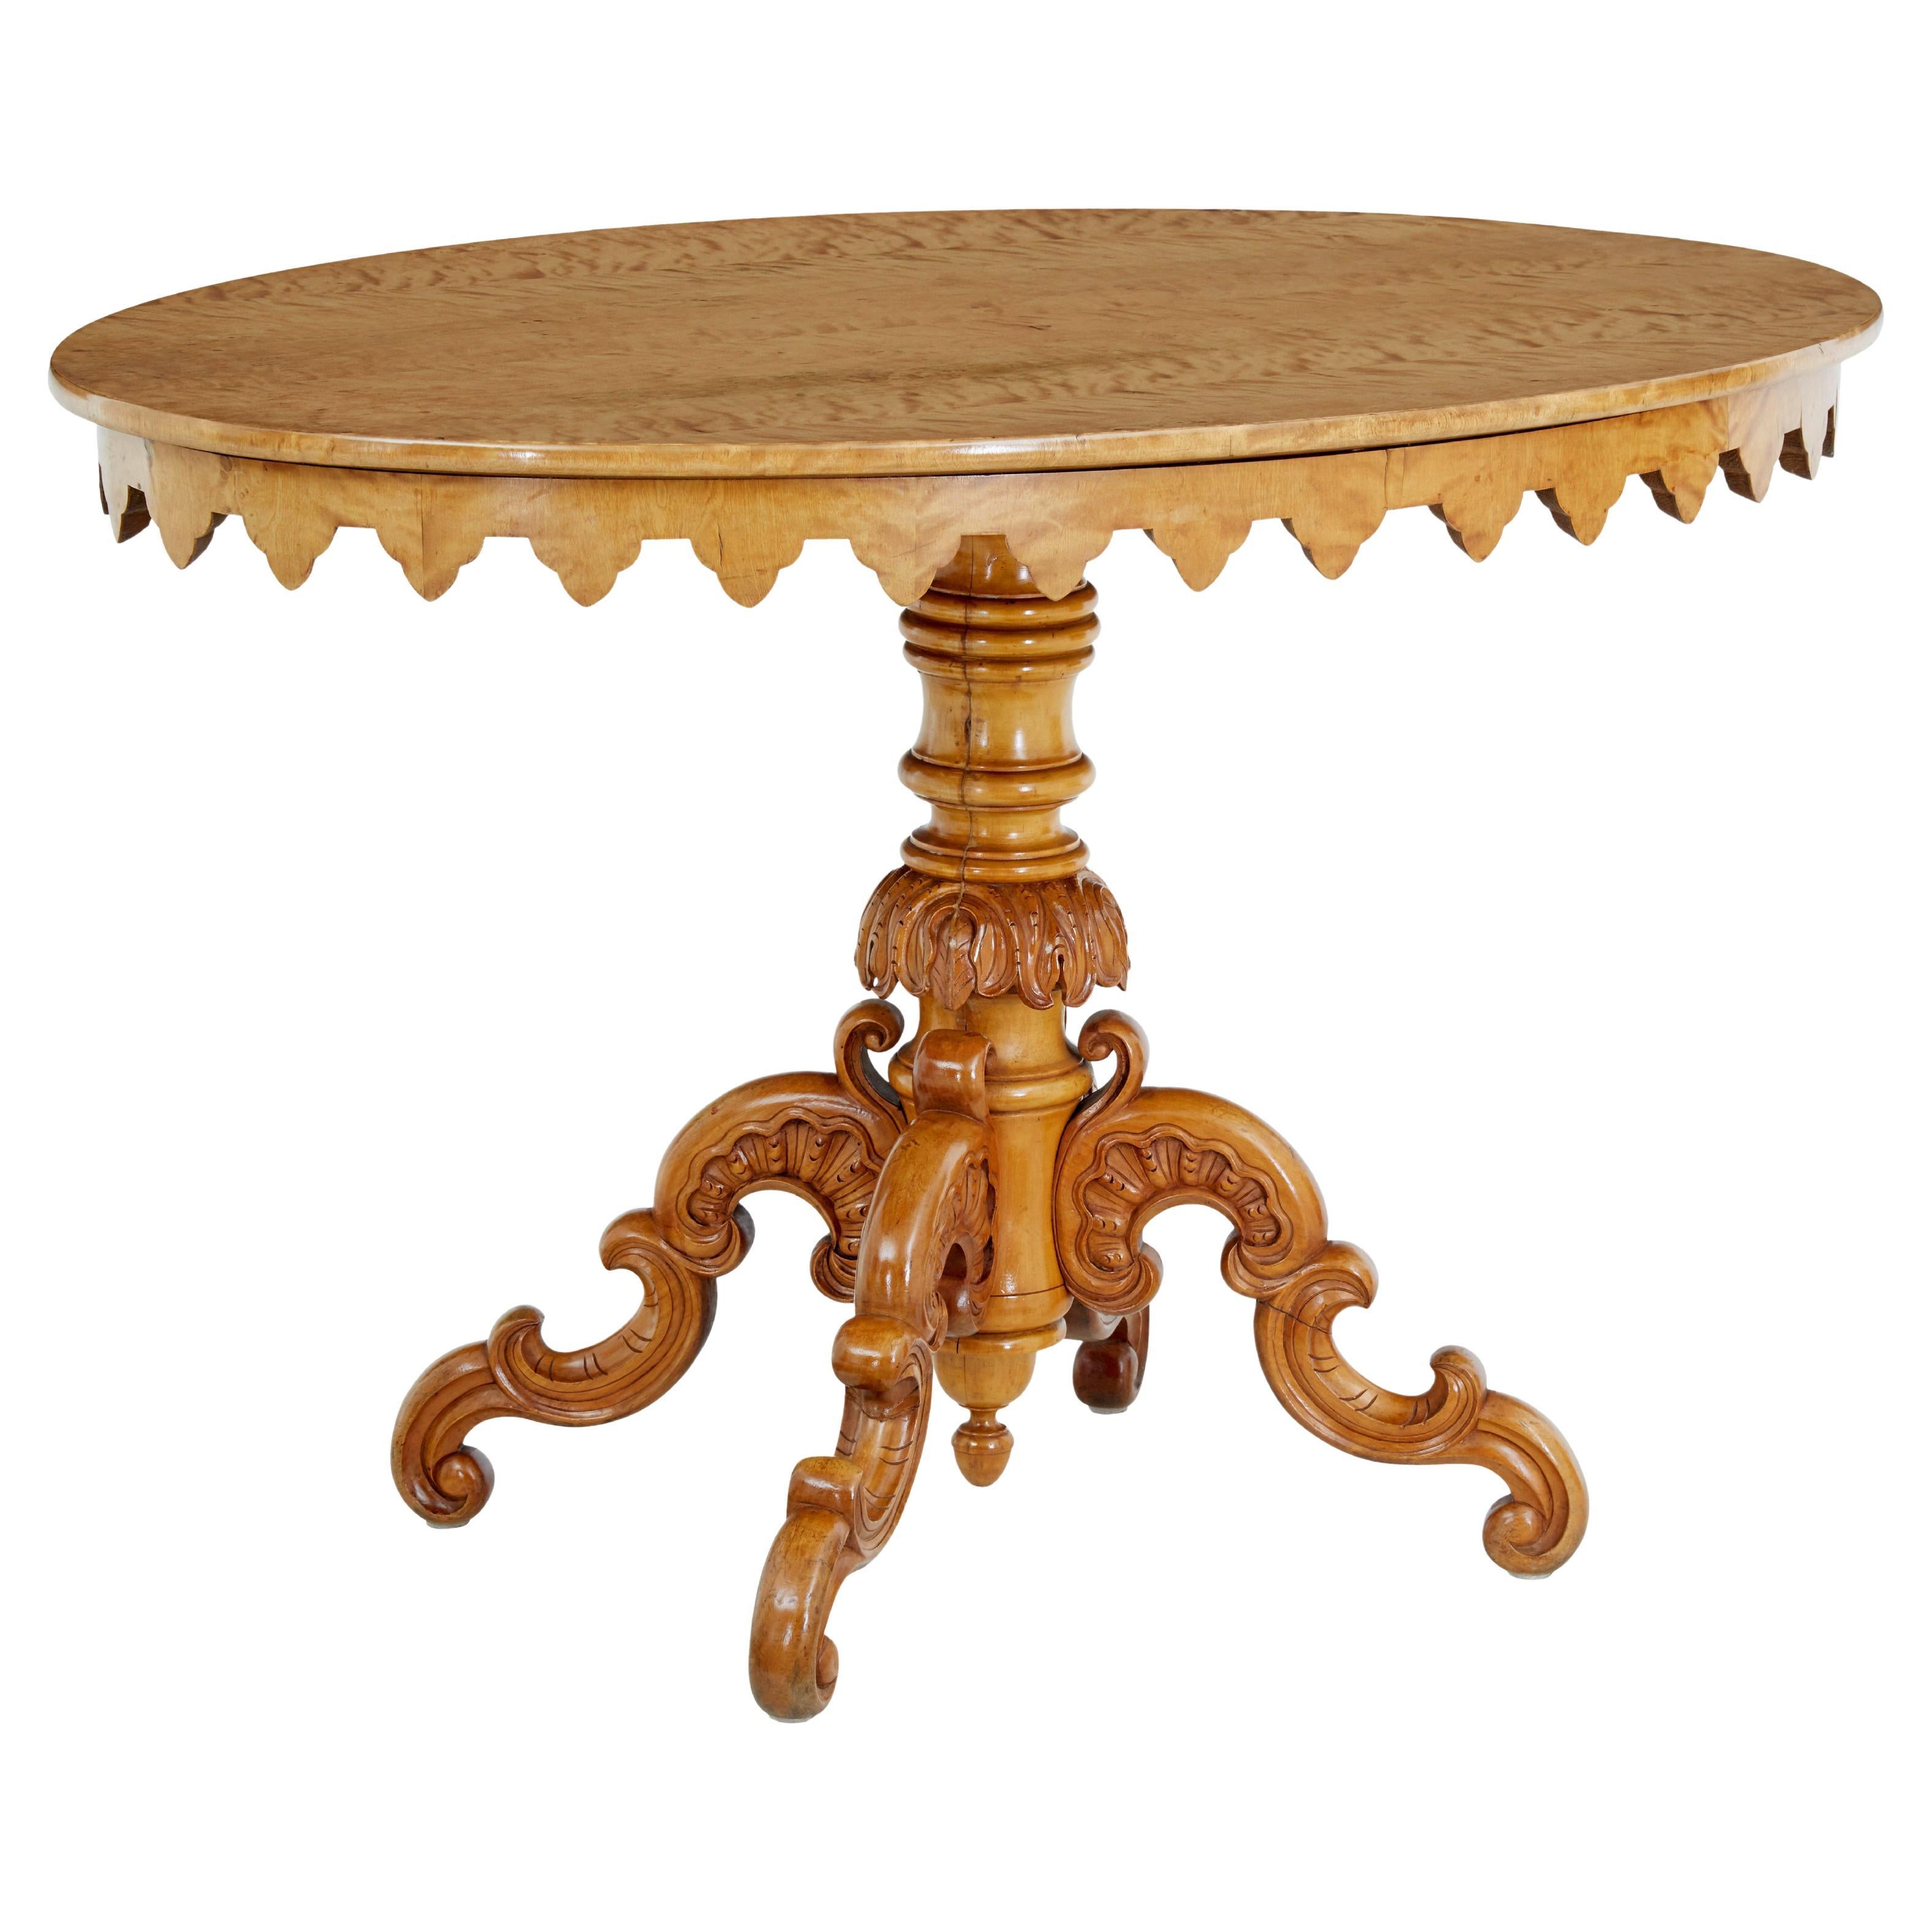 Swedish 19th century birch oval occasional table